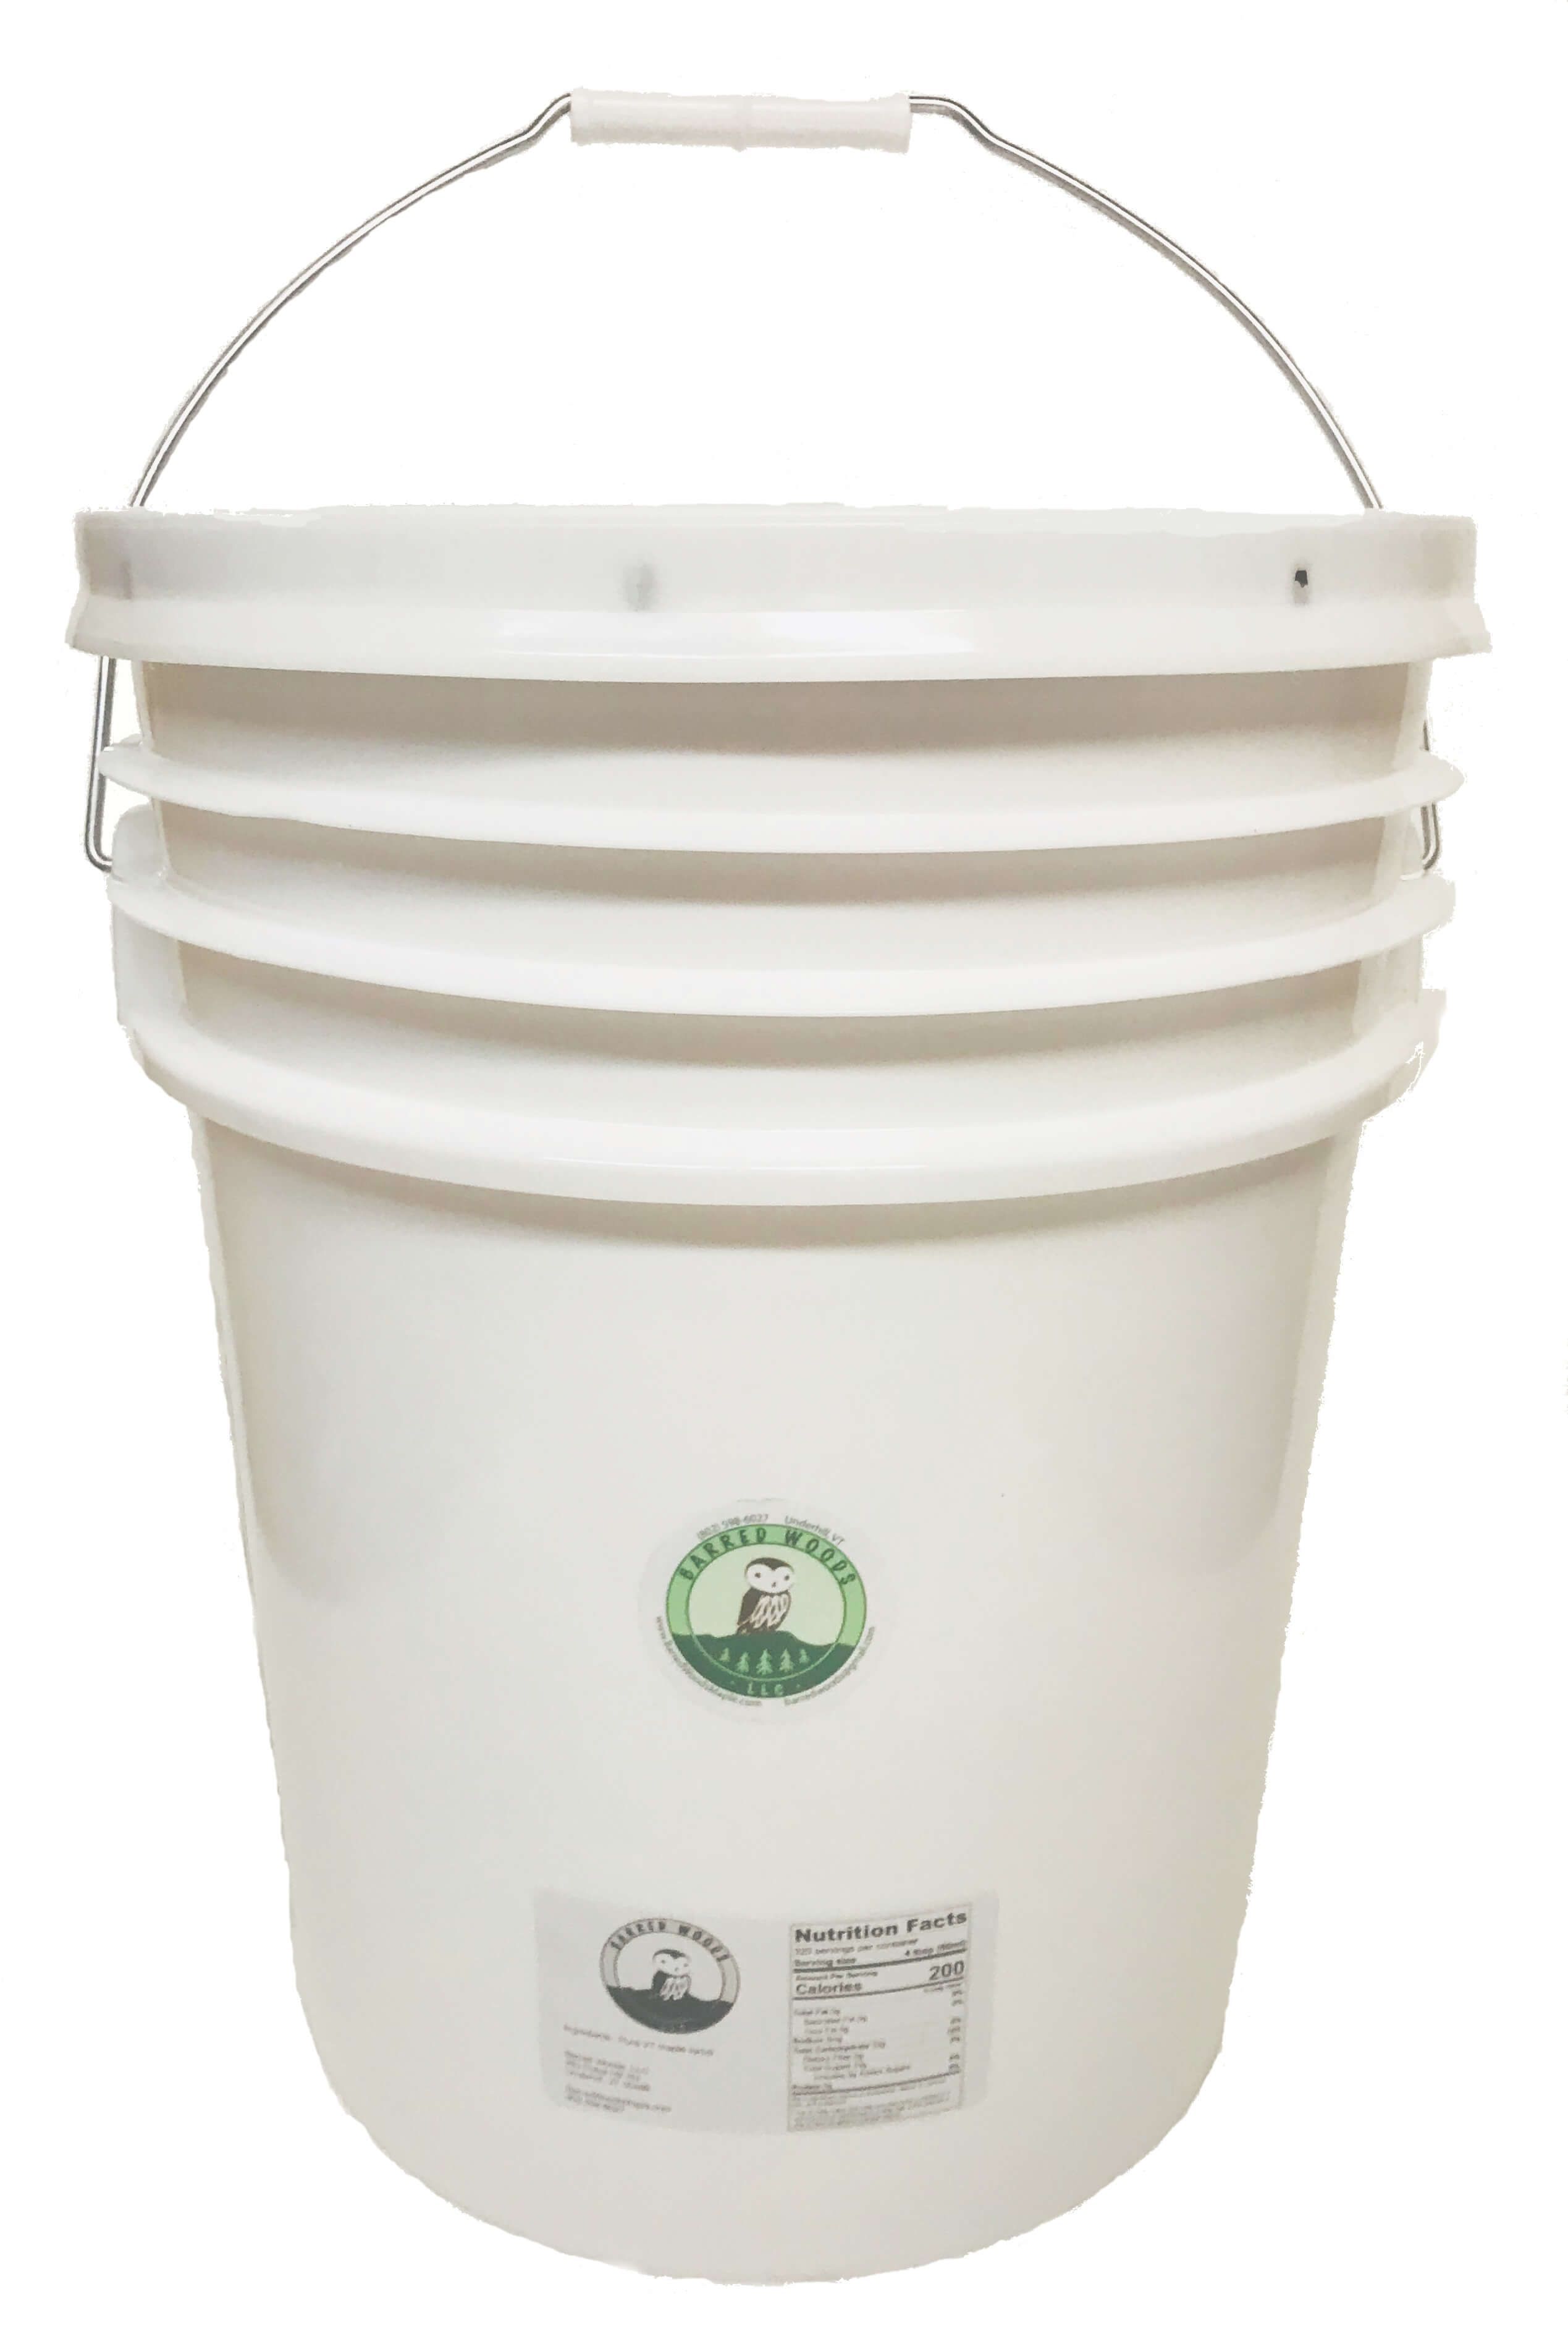 5 Gallon Pail of Grade A Pure Vermont Maple Syrup - Maple Syrup in